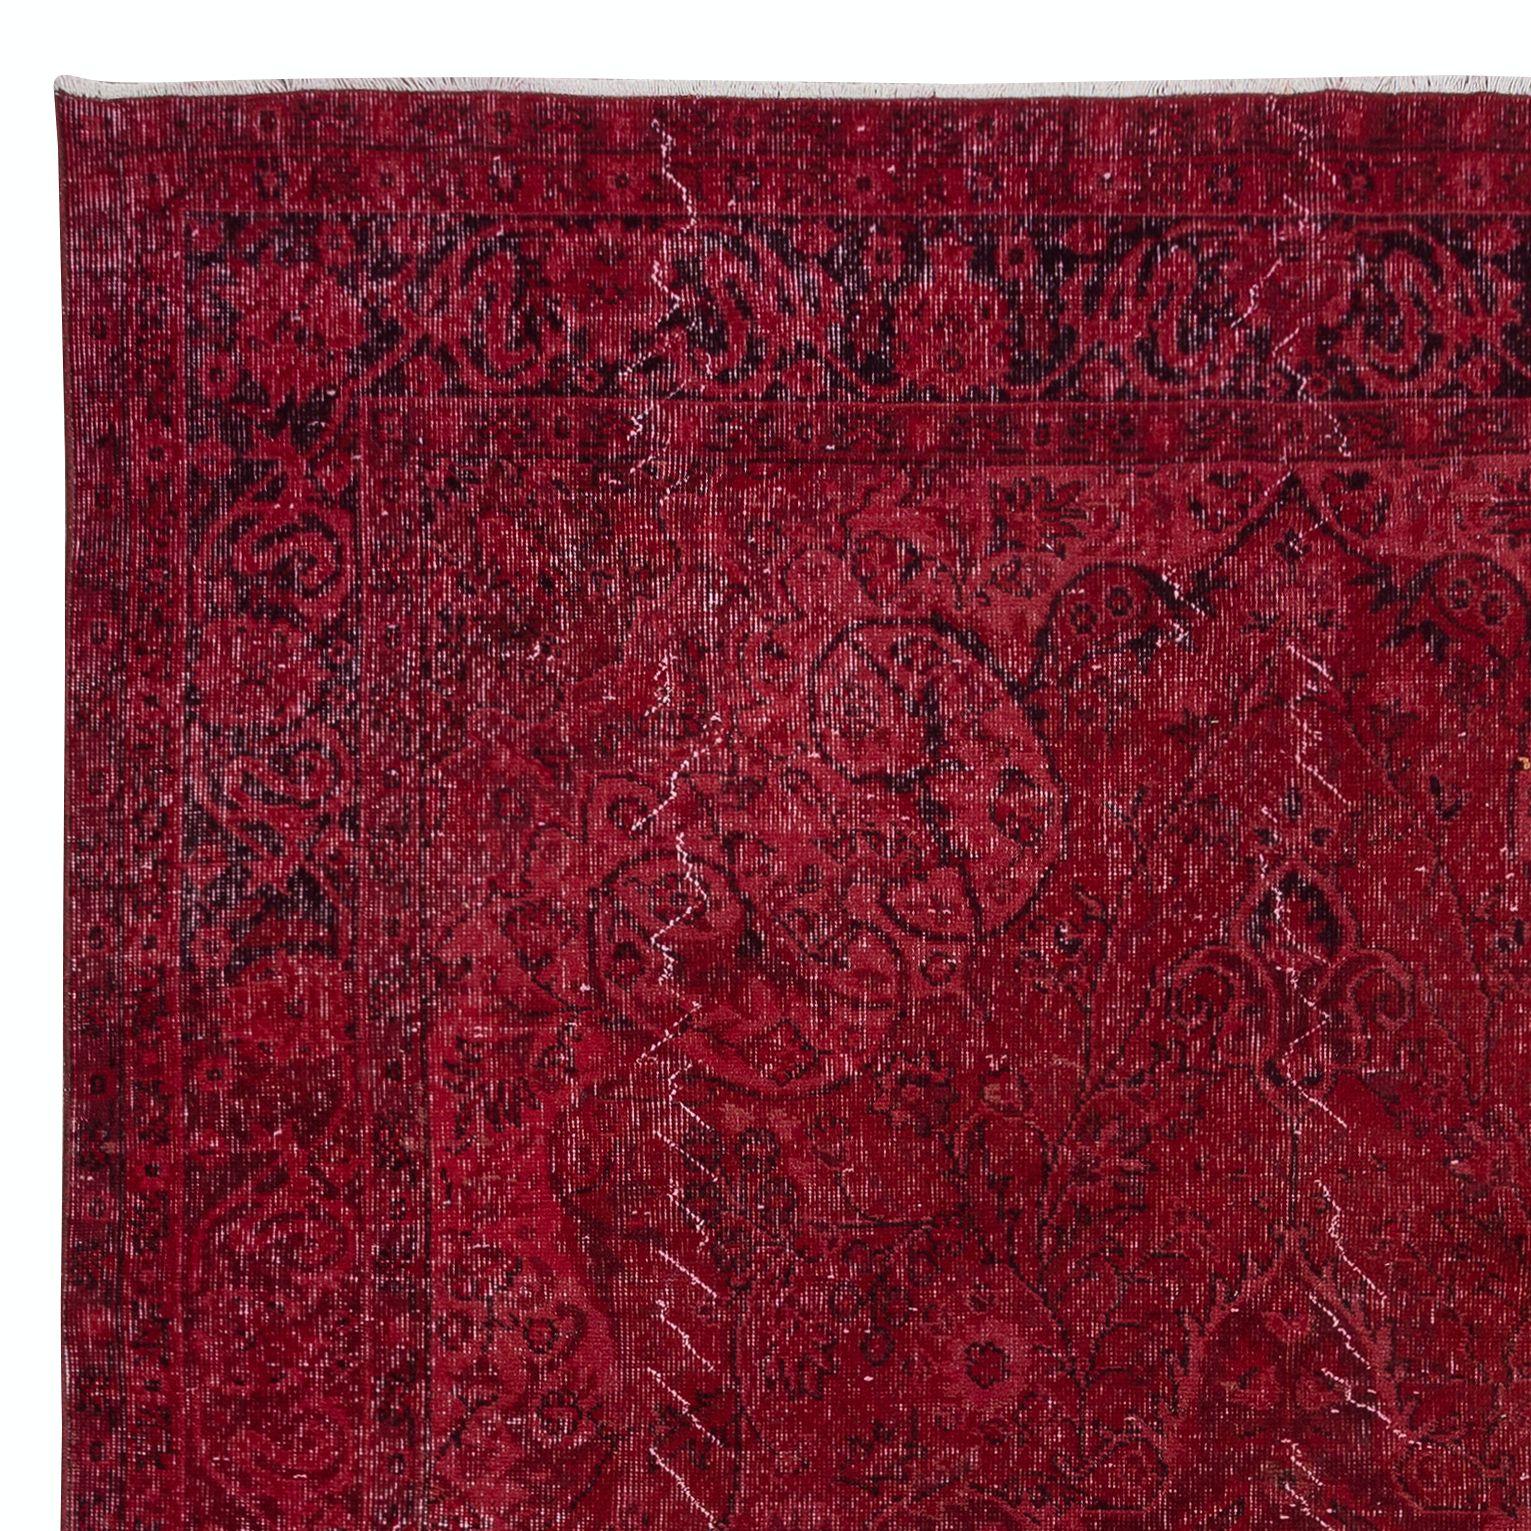 Hand-Knotted 7x10.4 Ft Unique Handmade Burgundy Red Rug, Contemporary Turkish Wool Carpet For Sale